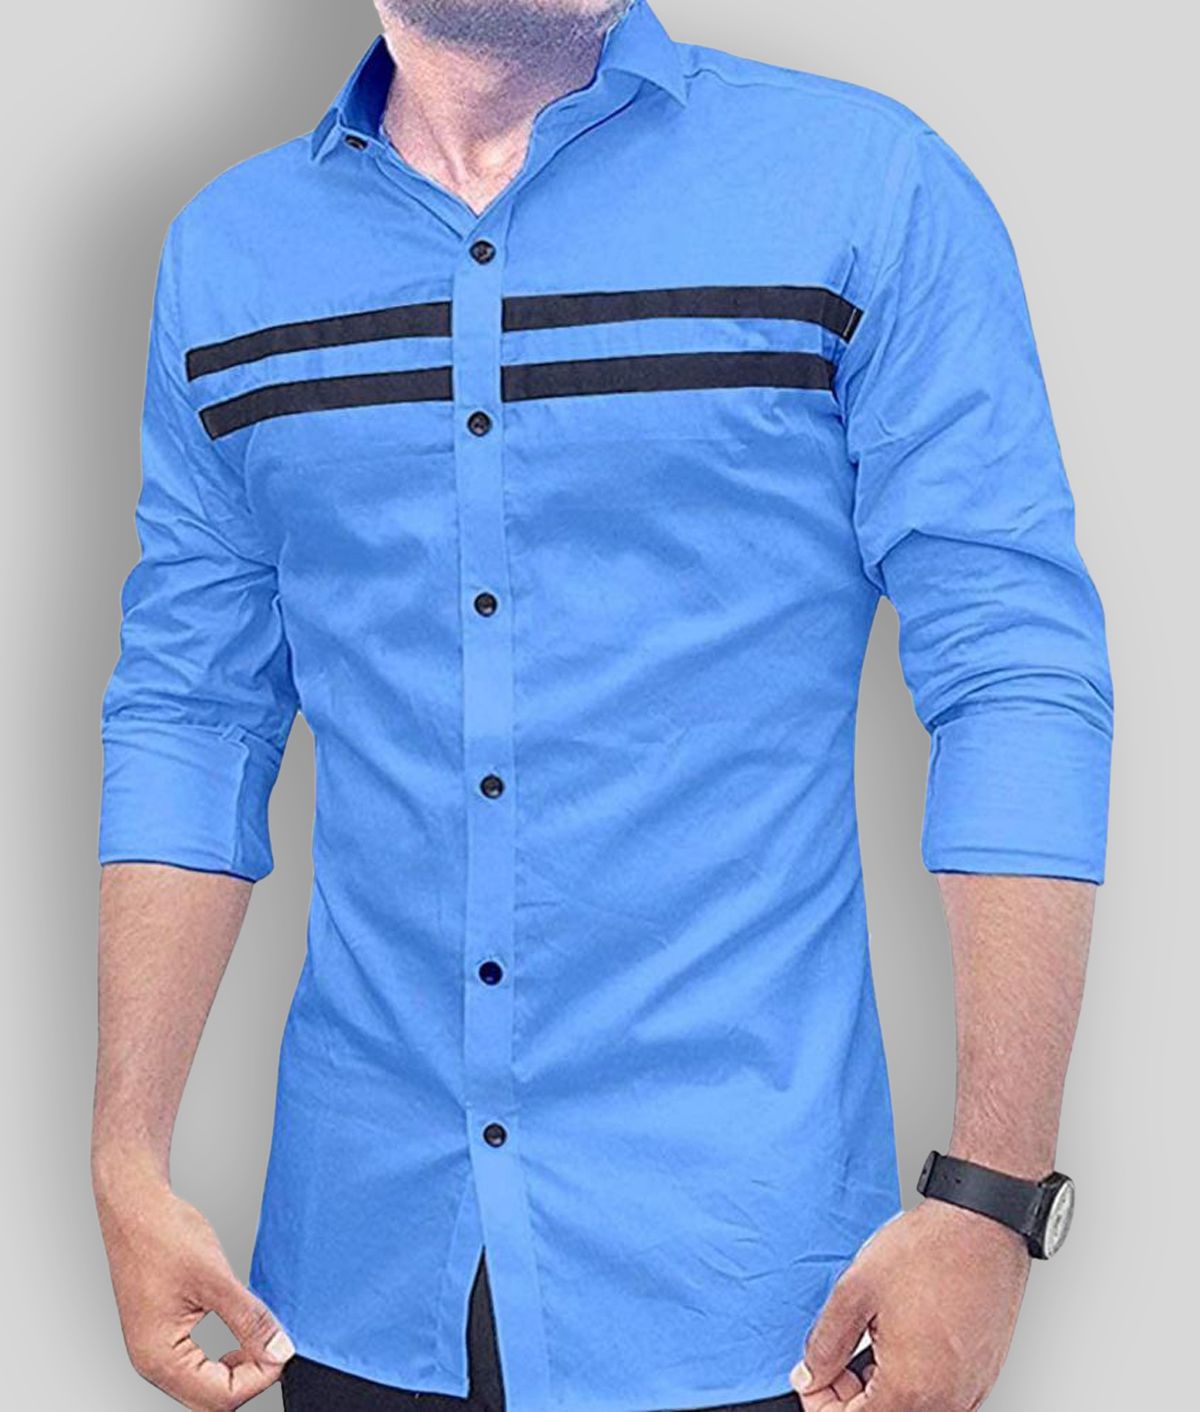     			VERTUSY Cotton Blend Regular Fit Striped Full Sleeves Men's Casual Shirt - Light Blue ( Pack of 1 )